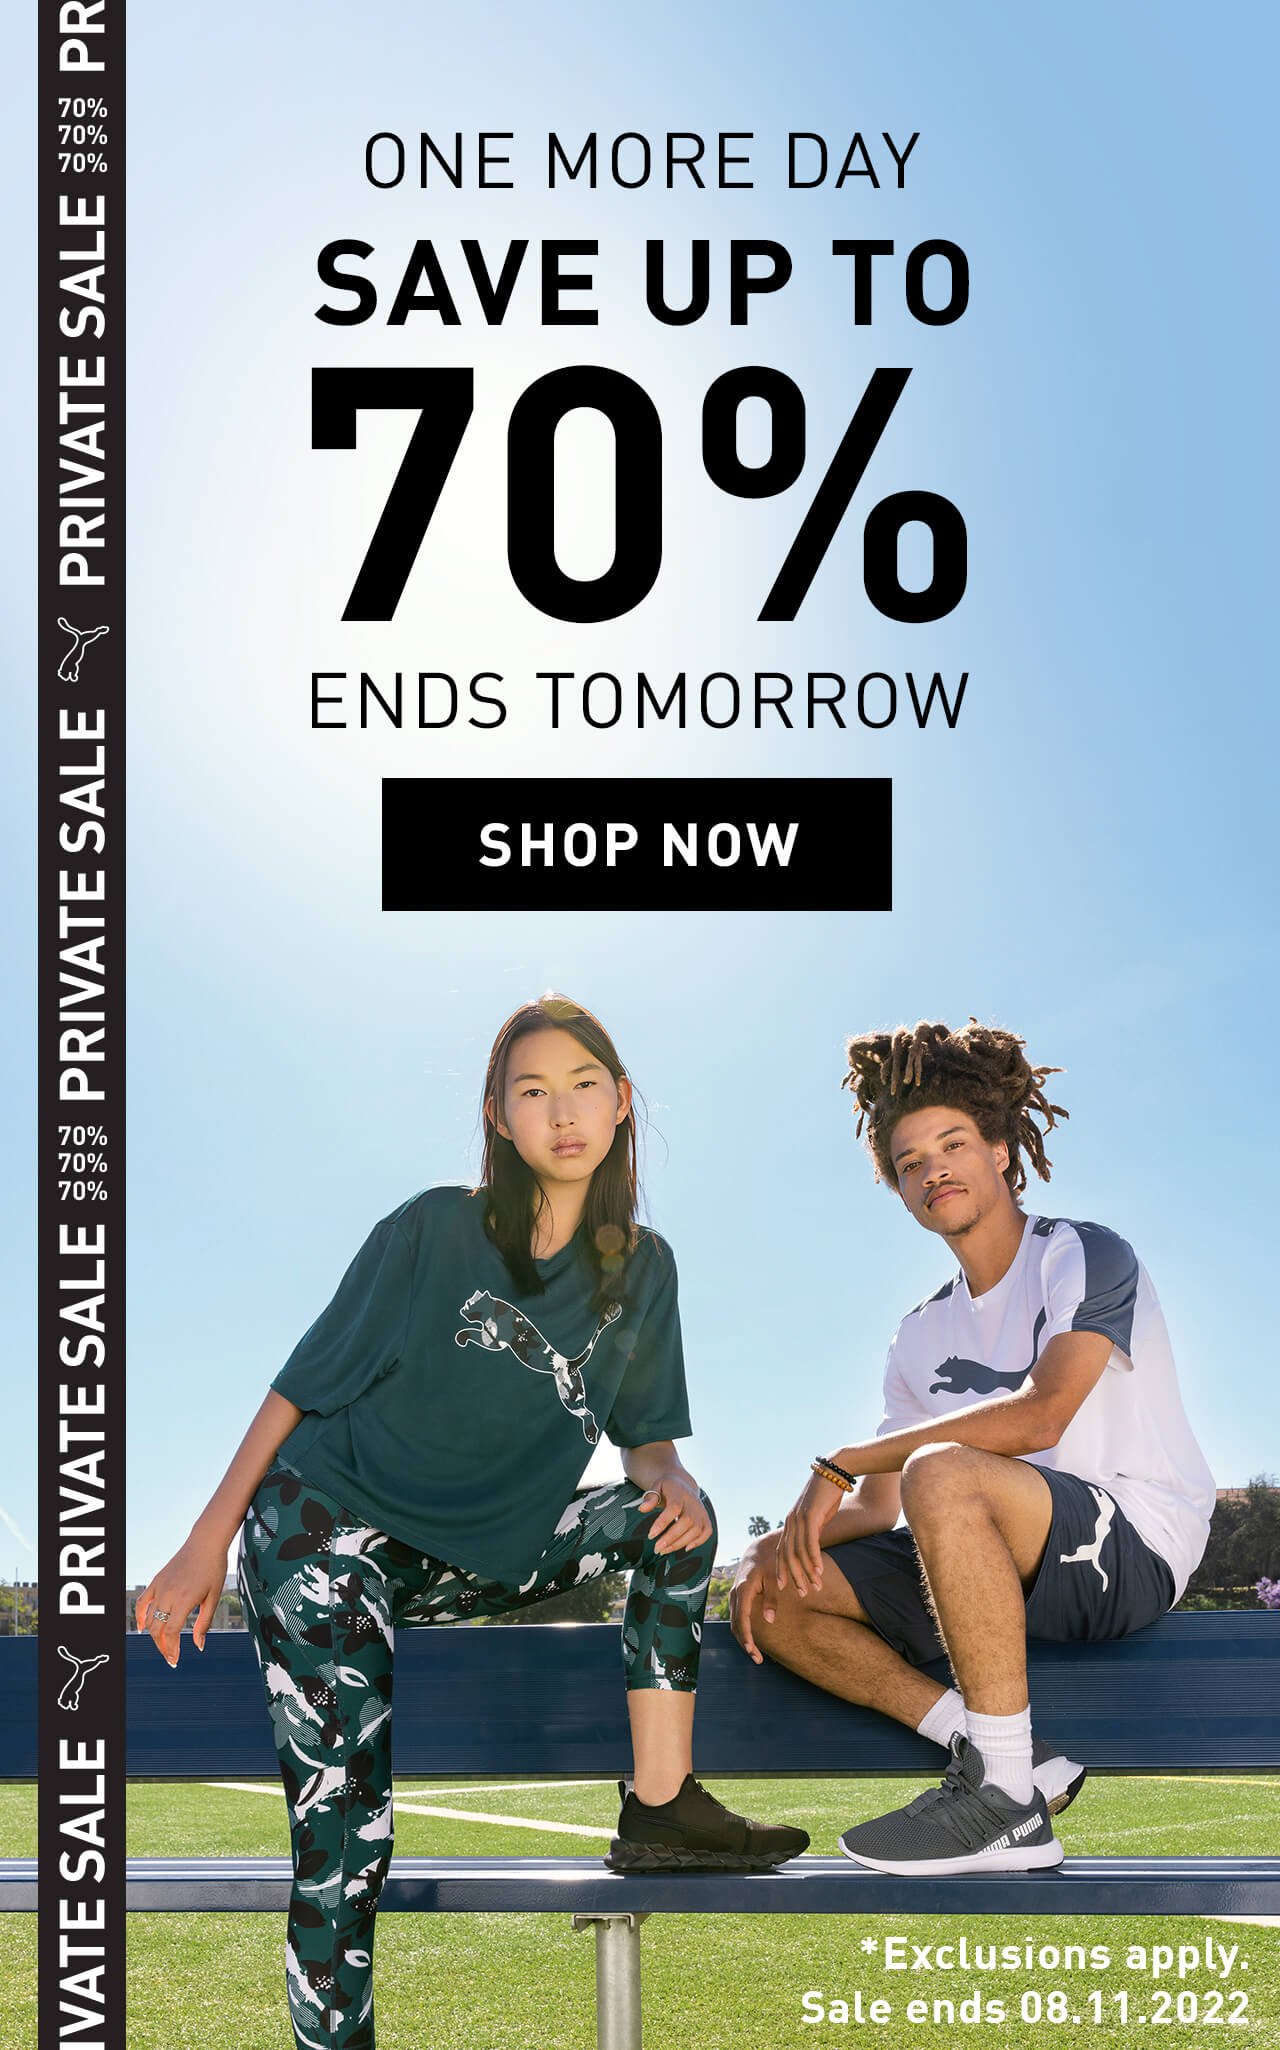 ONE MORE DAY | SAVE UP TO 70% | ENDS TOMORROW | SHOP NOW | *Exclusions apply. Sale ends 08.11.2022